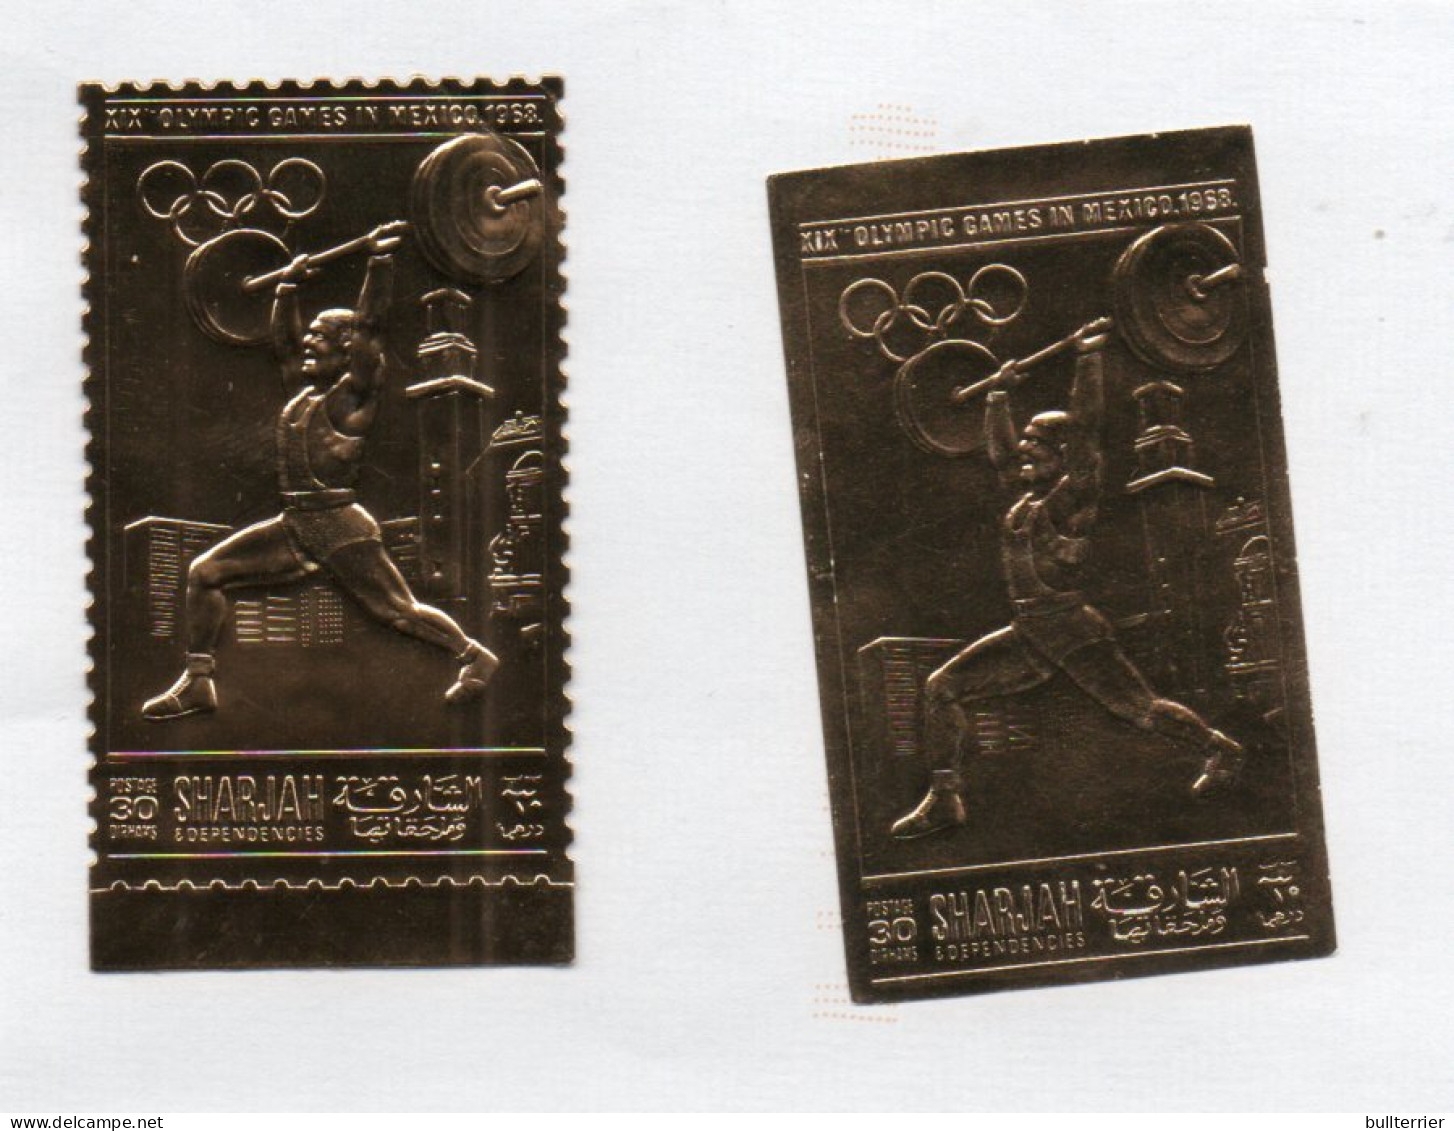 OLYMPICS - SHARJAH - 1968 -OLYMPICS / WEIGHTIFTING GOLD STAMP PERF & IMPERF MINT NEVER HINGED - Ete 1968: Mexico